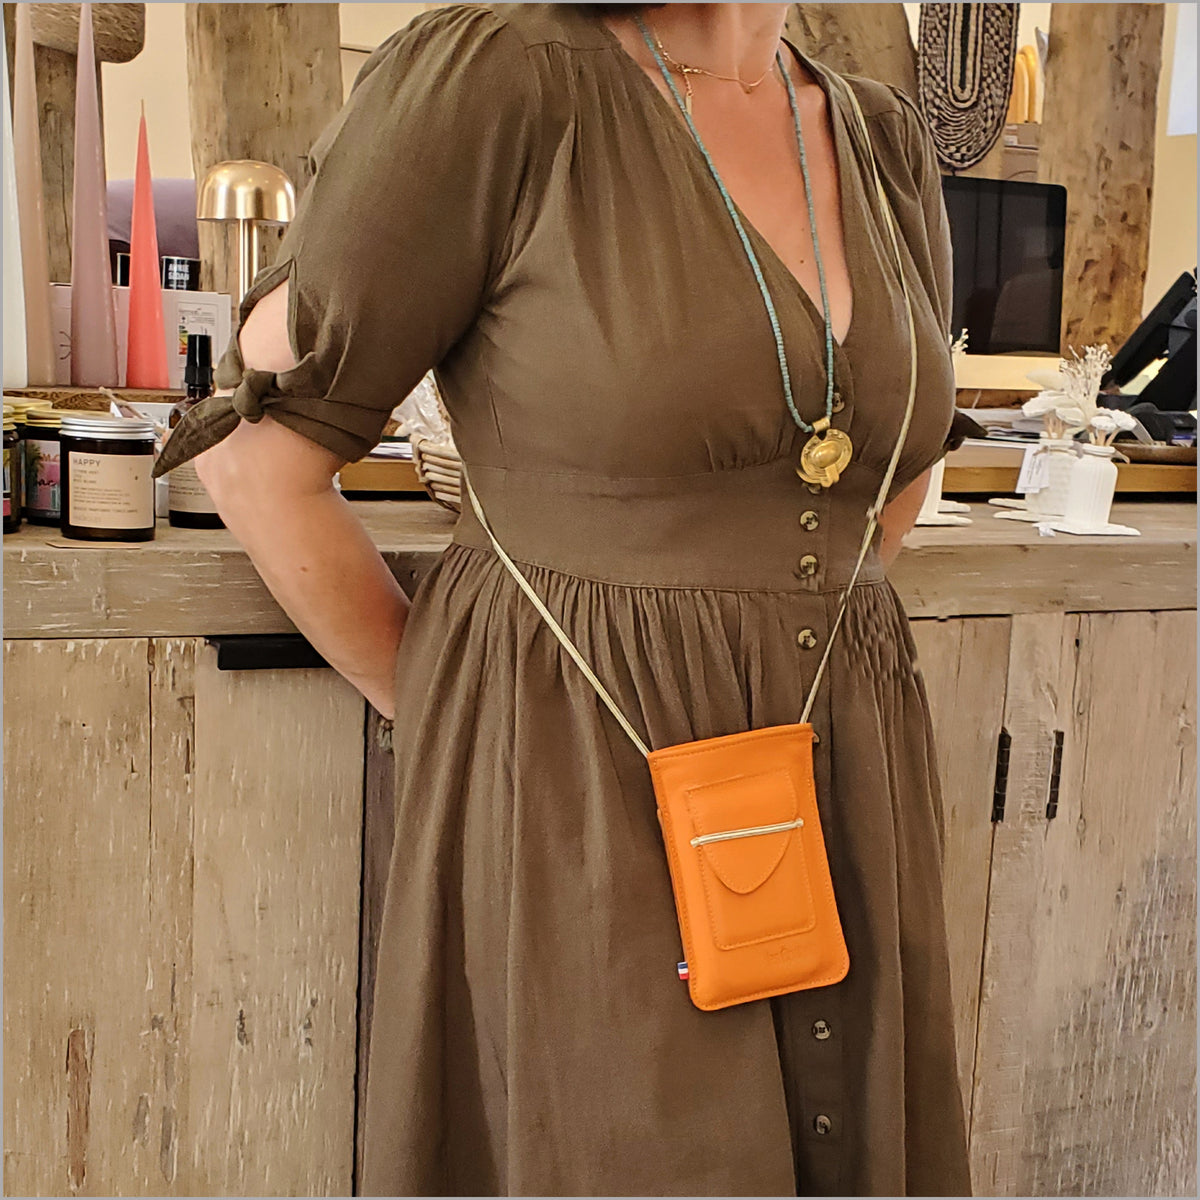 Orange leather phone pouch with adjustable shoulder strap